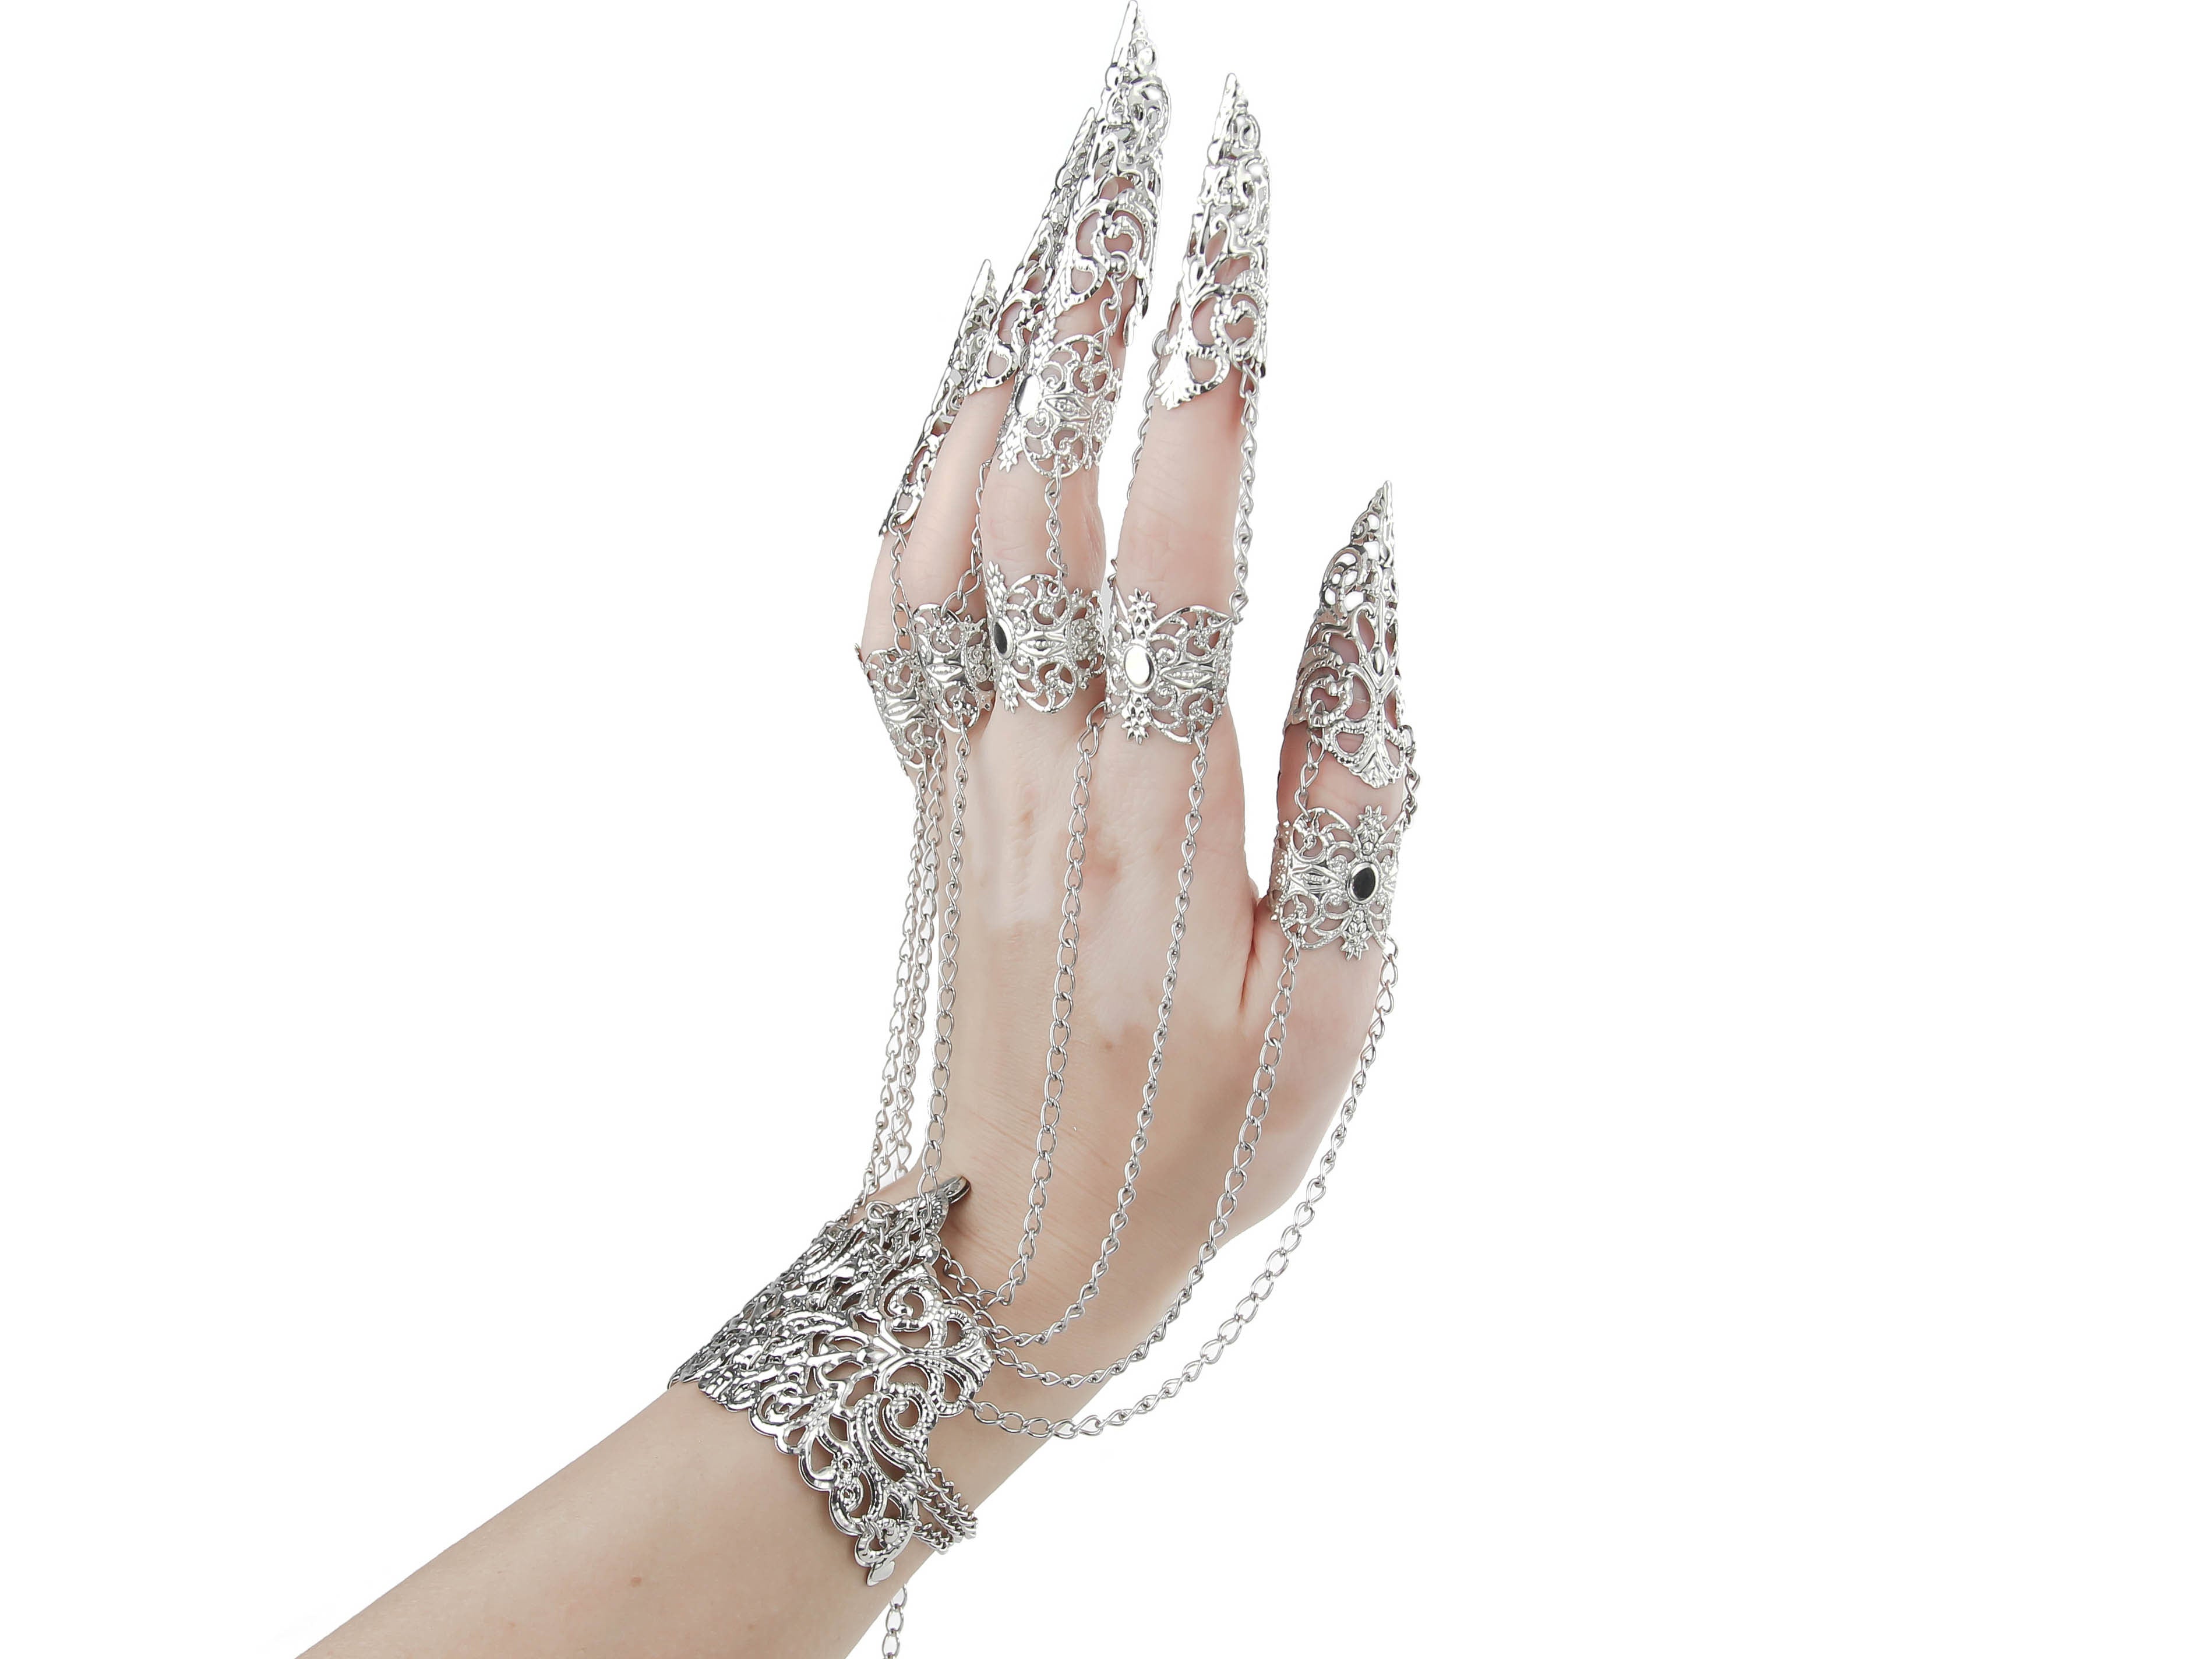 Medusa Hand Armor, Snakes Claw Rings Set for One Hand 